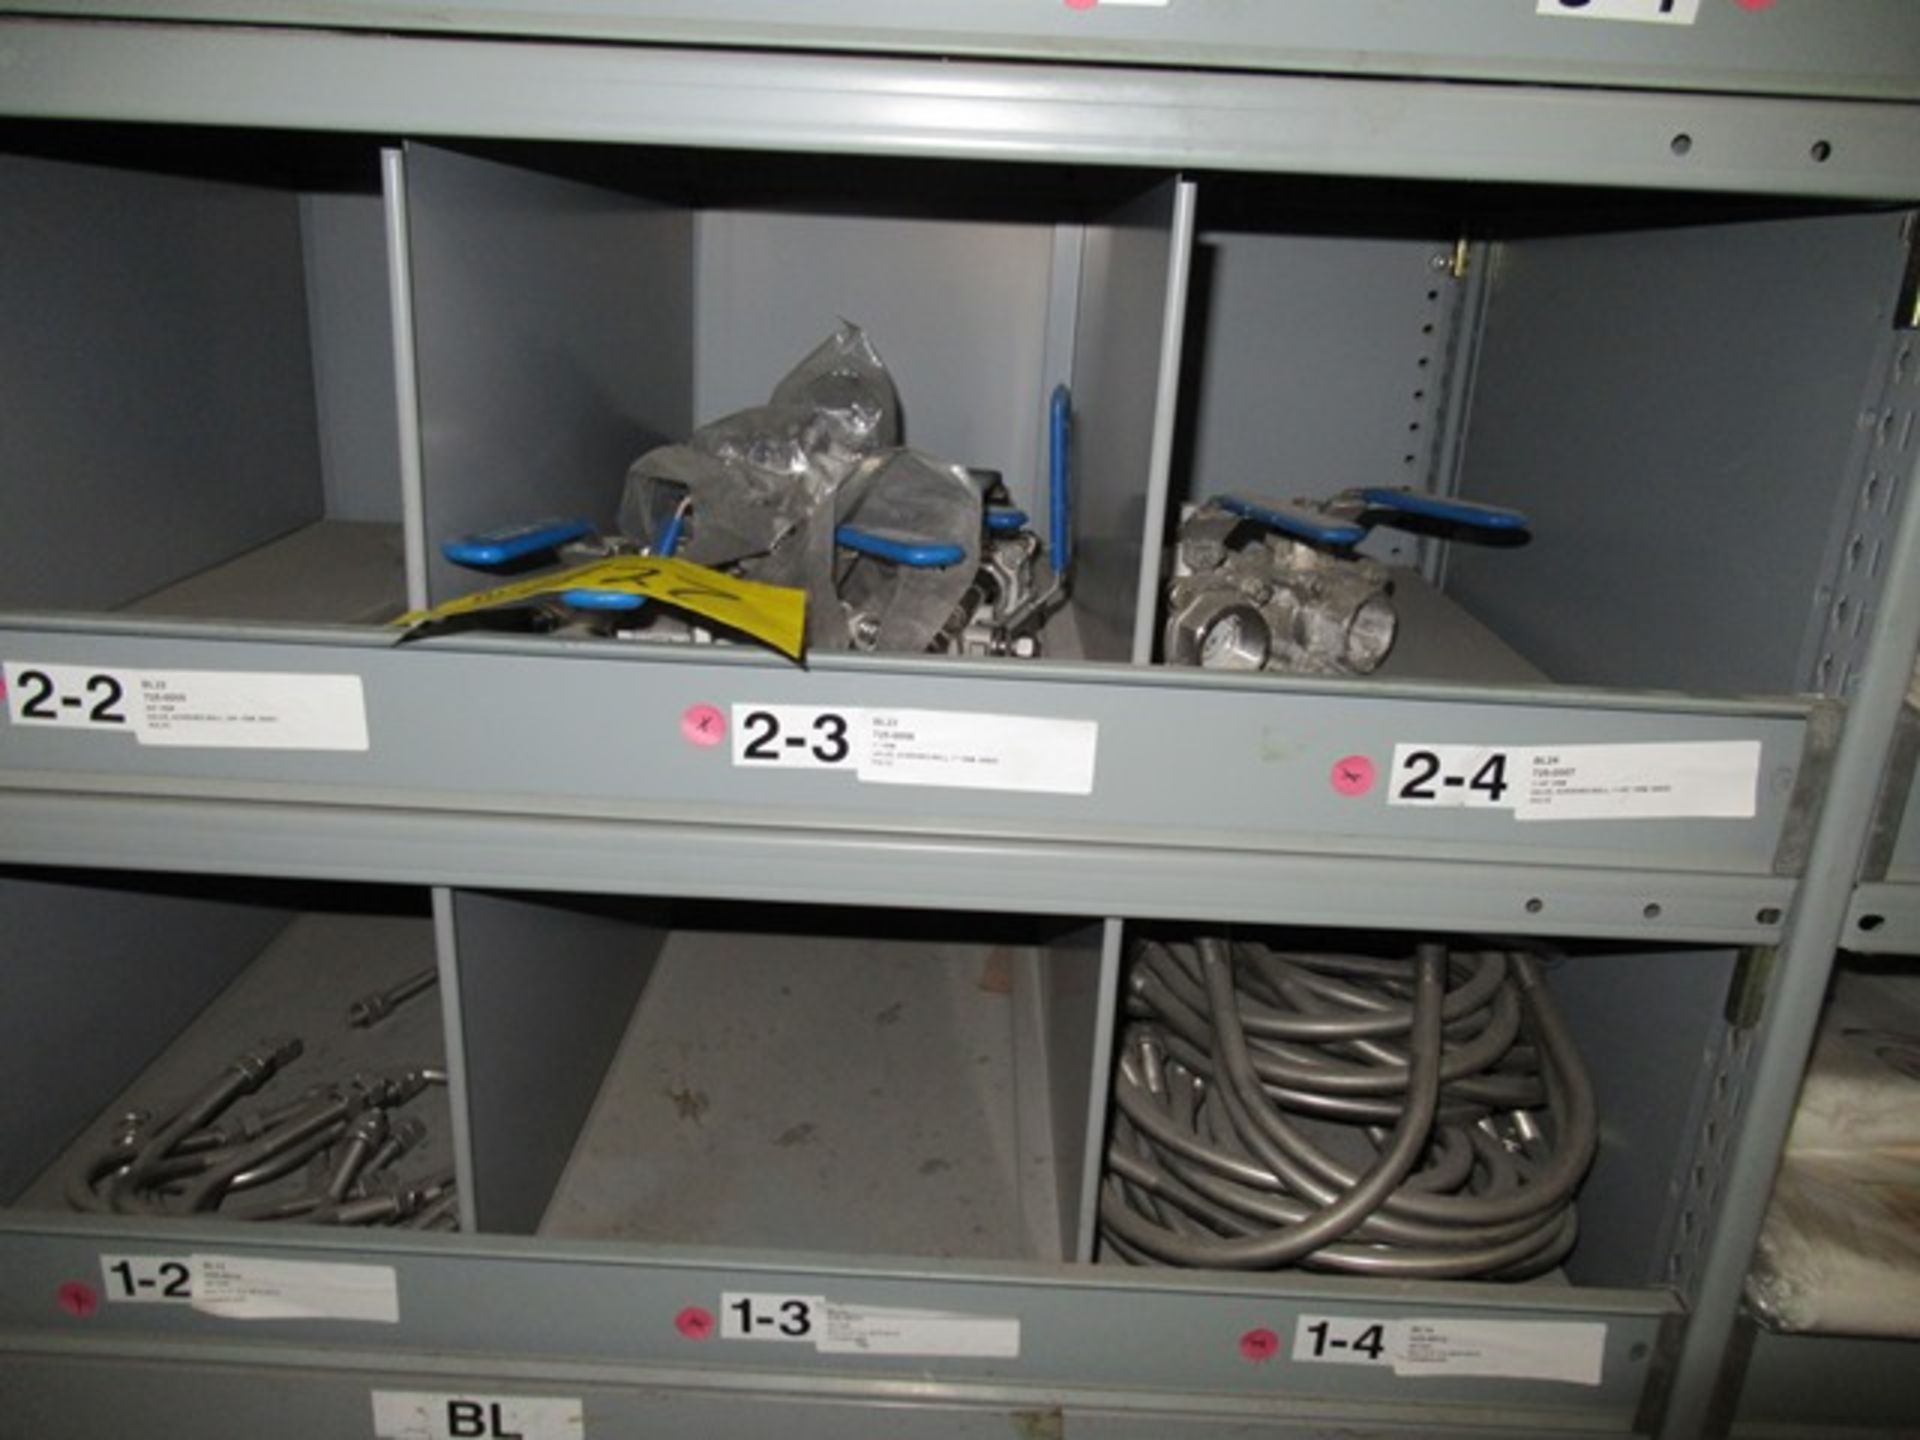 LOT ASST. CF, VELAN, APOLLO, FNW VALVES, FLOW SWITCHES, FITTINGS, COUPLINGS, ETC. 2-SECTIONS OF - Image 8 of 9